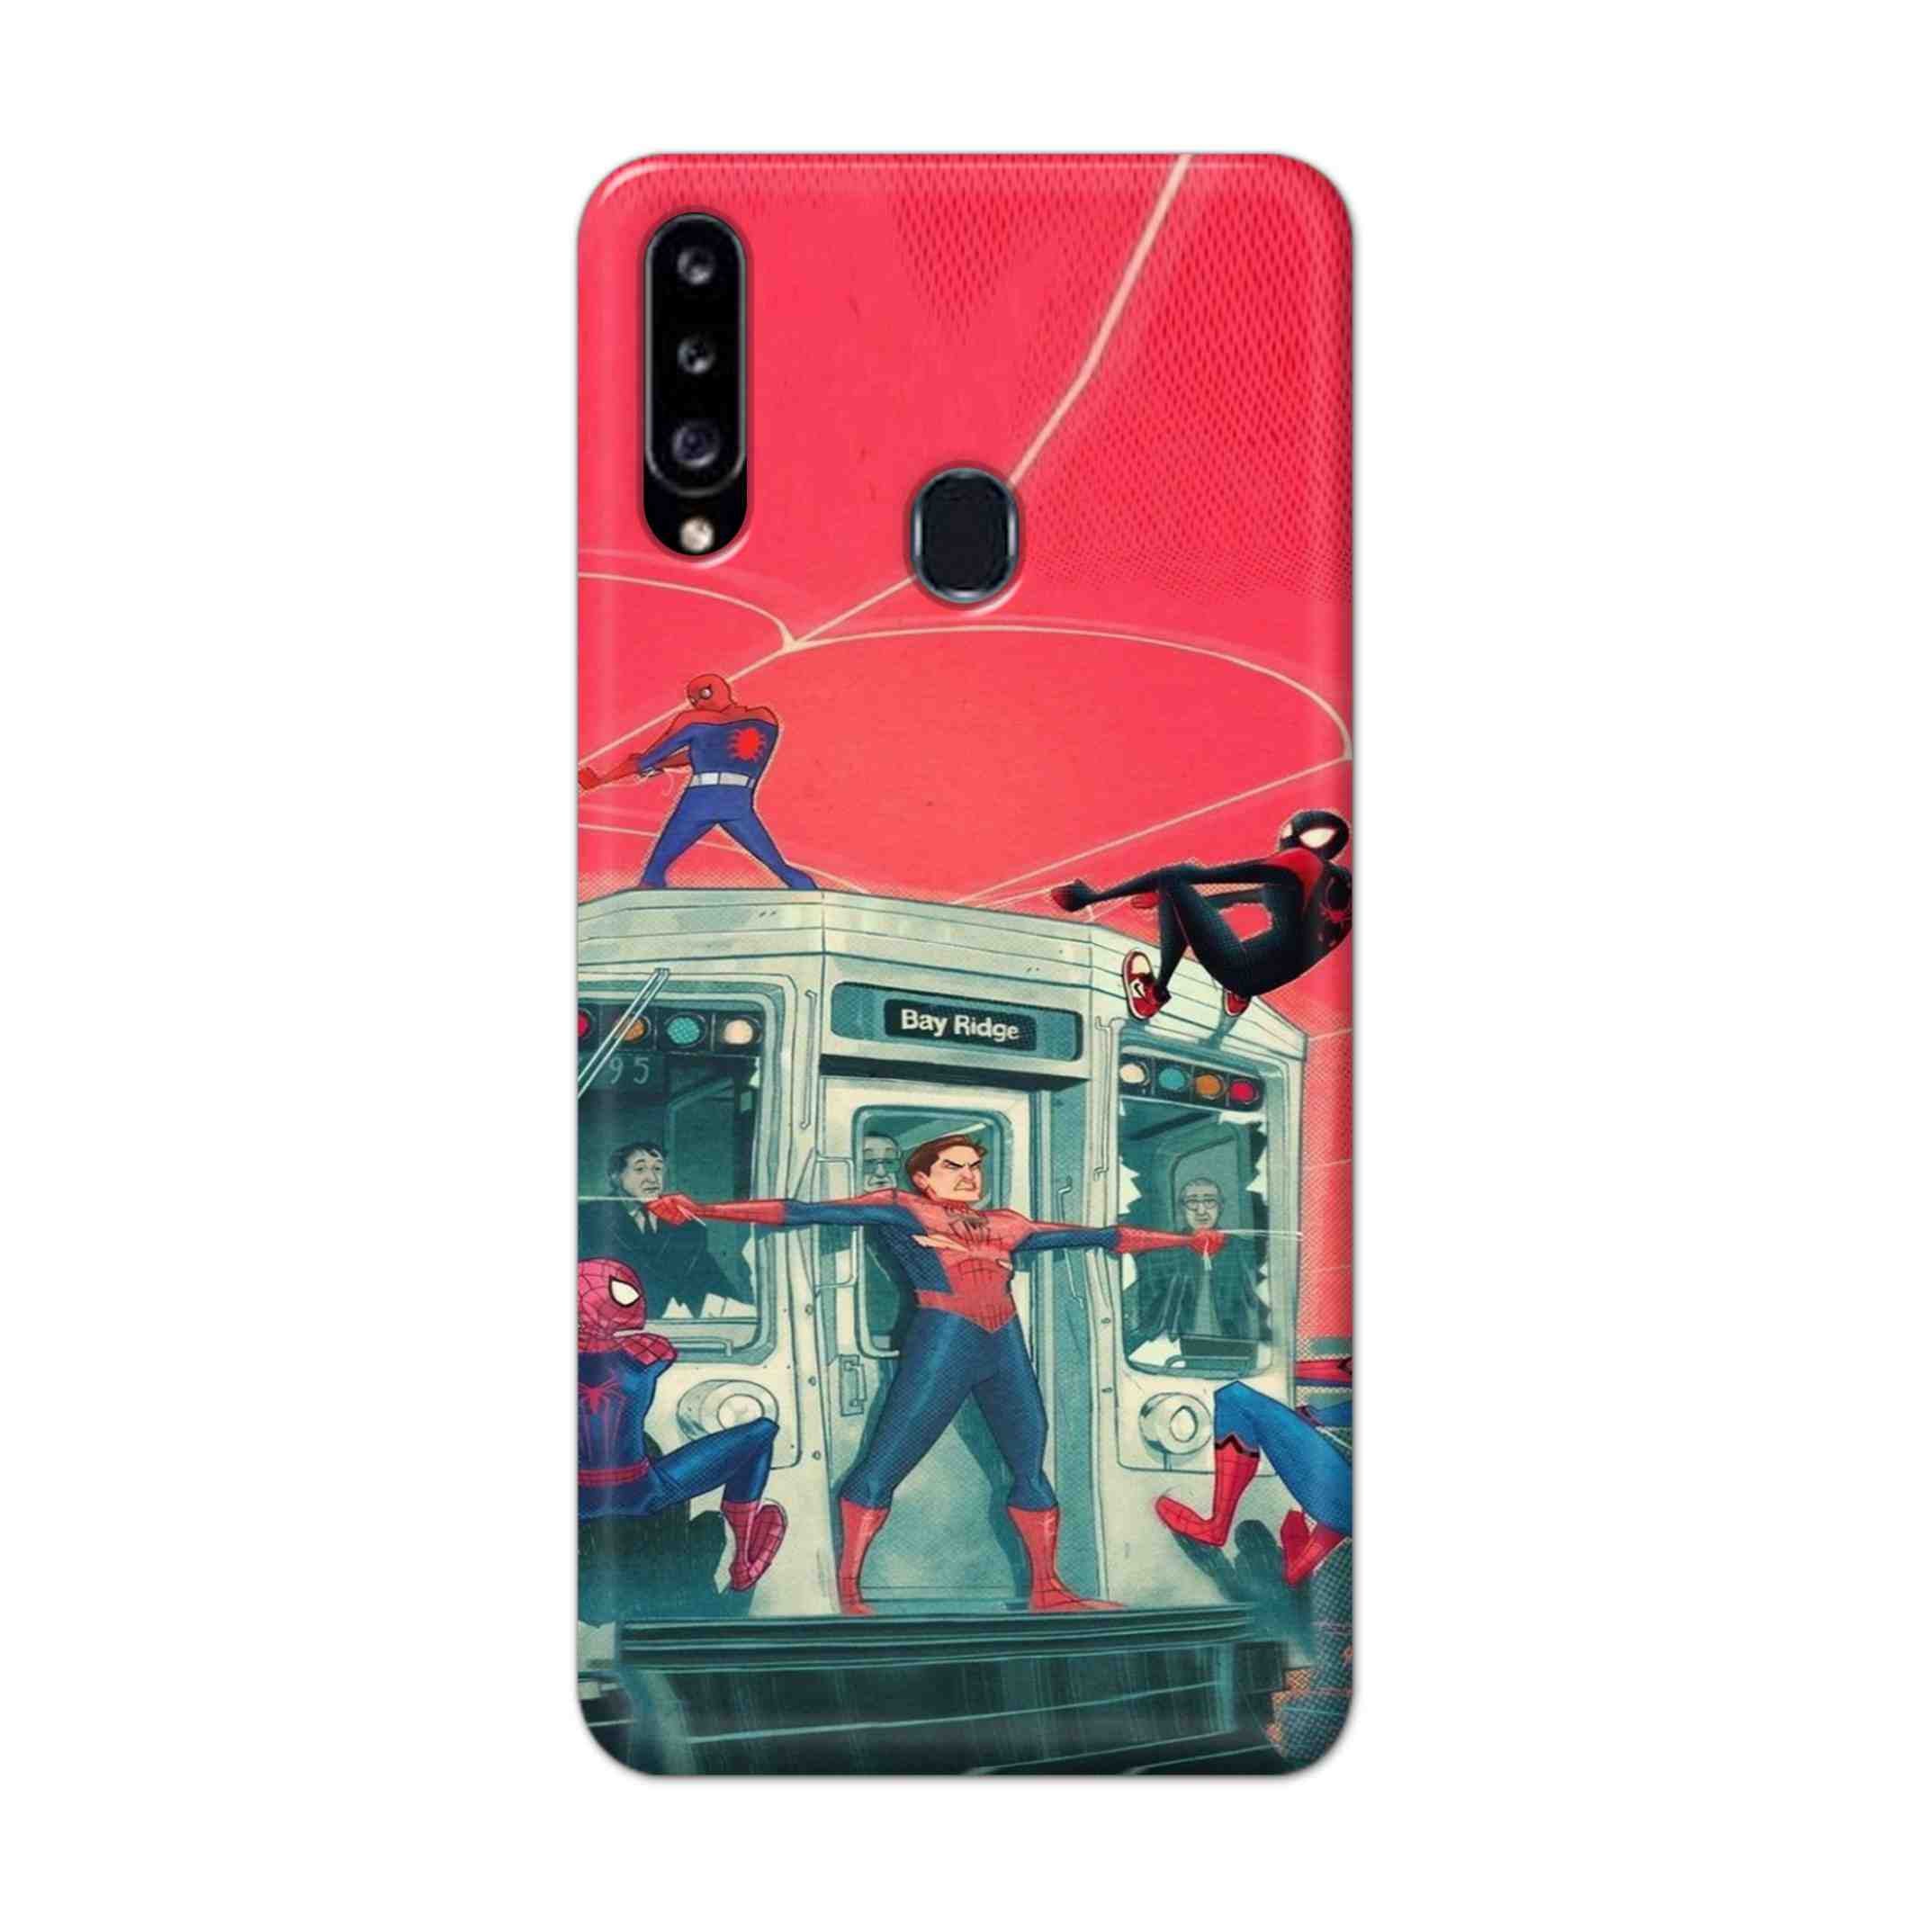 Buy All Spiderman Hard Back Mobile Phone Case Cover For Samsung Galaxy A21 Online